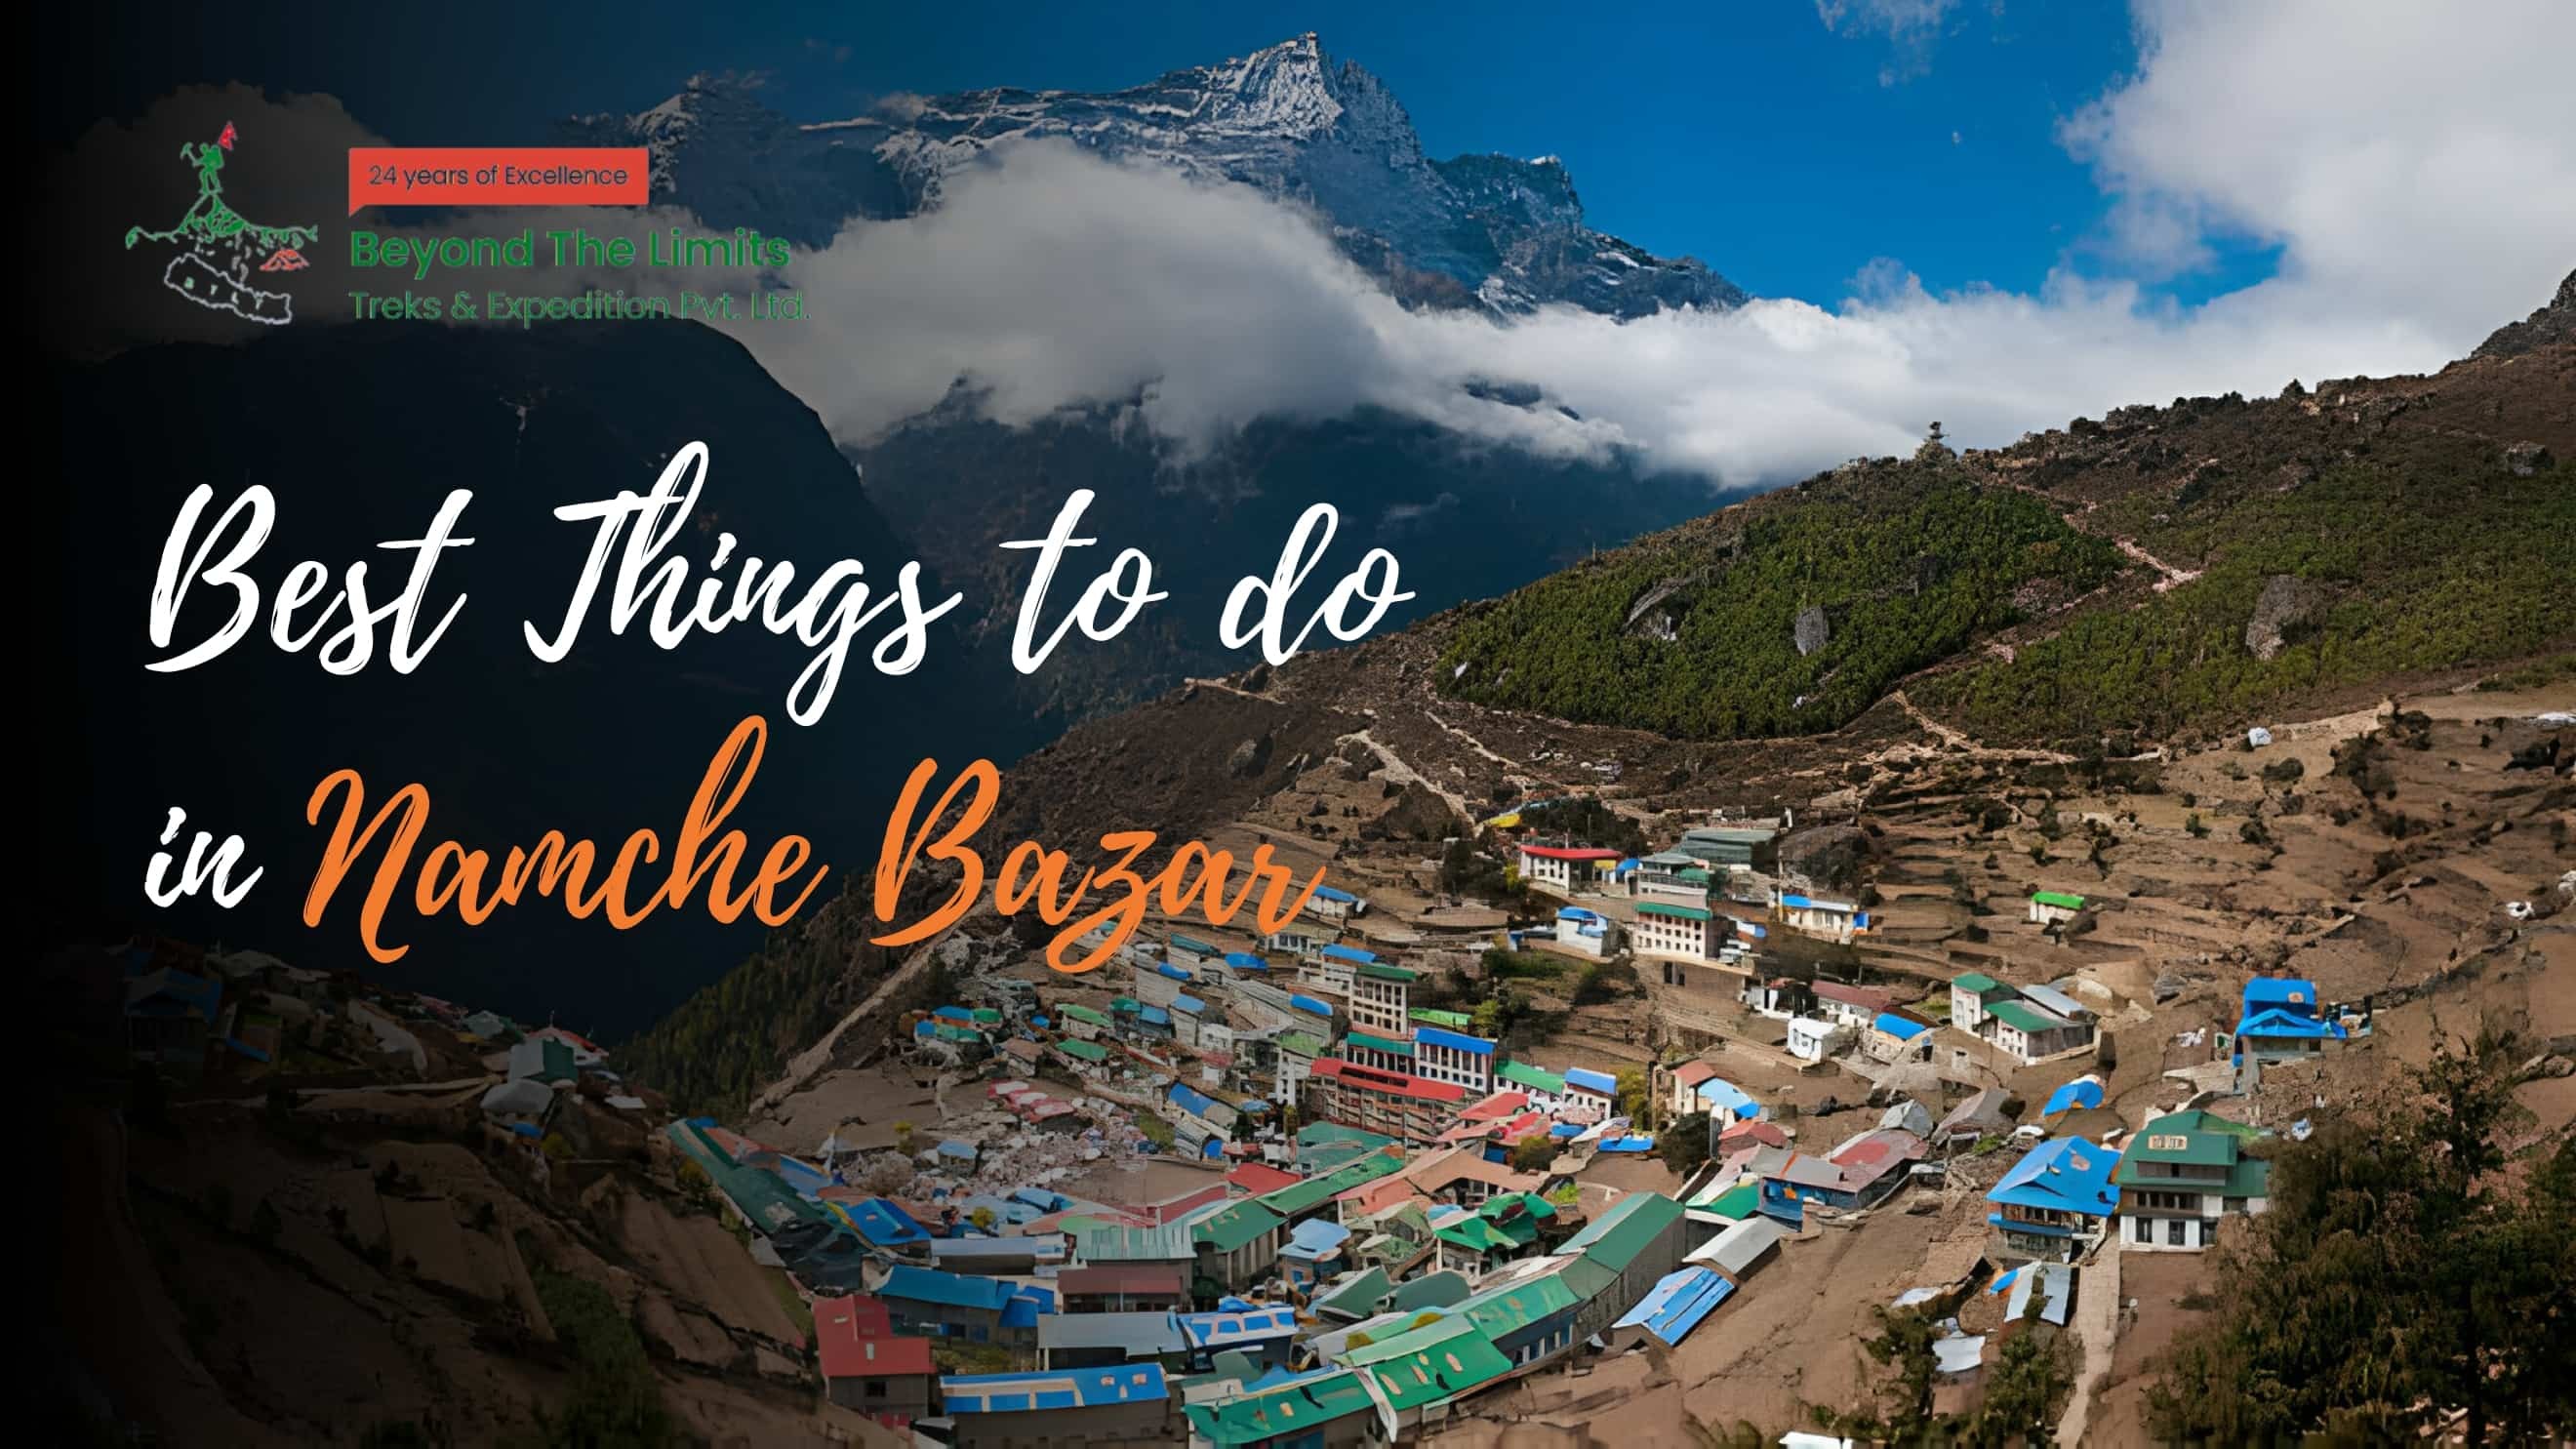 Best-Things-to-do-in-Namche-Bazar